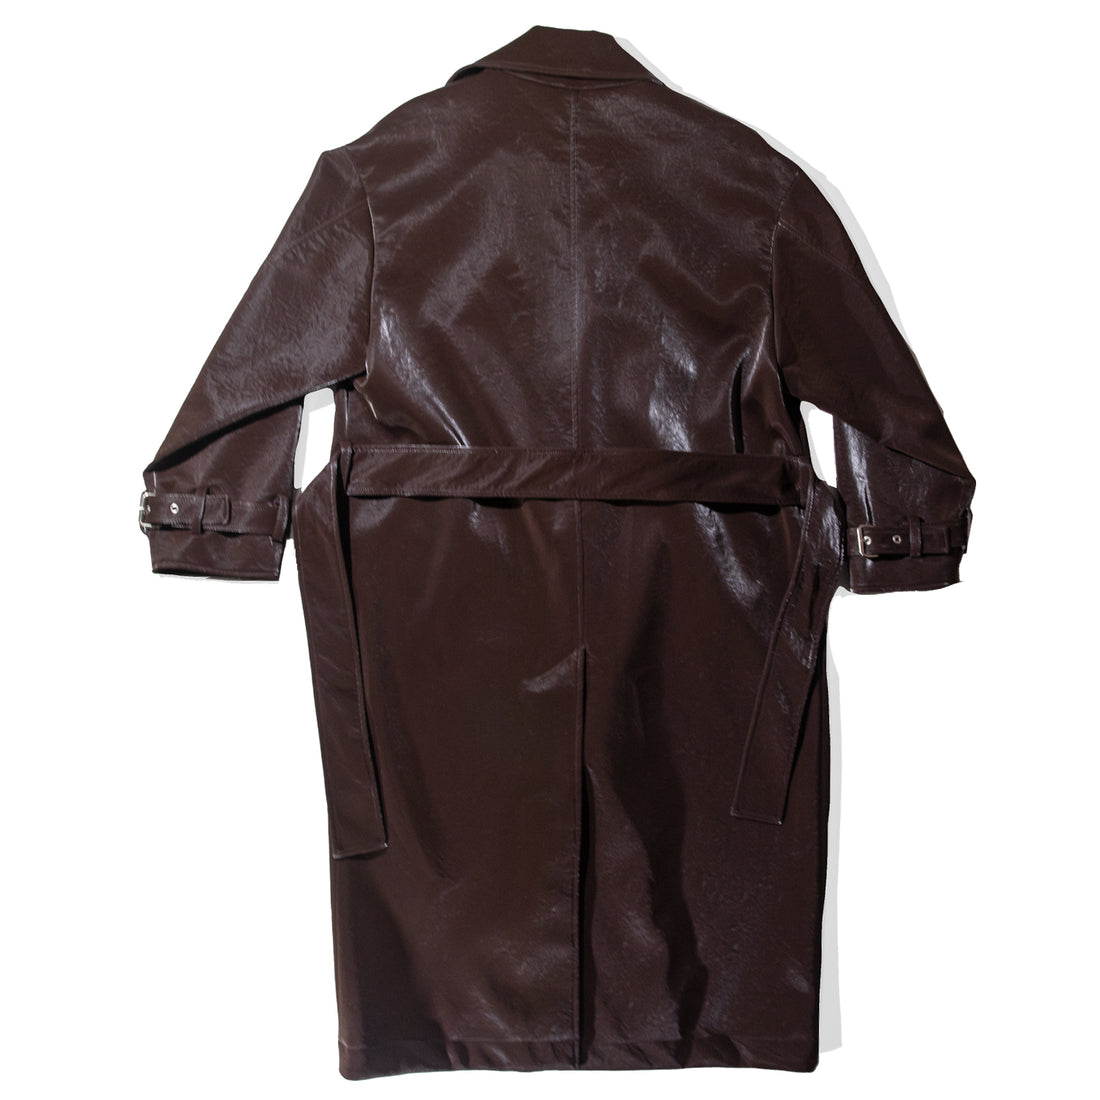 Nomia Oversize Trench in Ebony Faux Leather